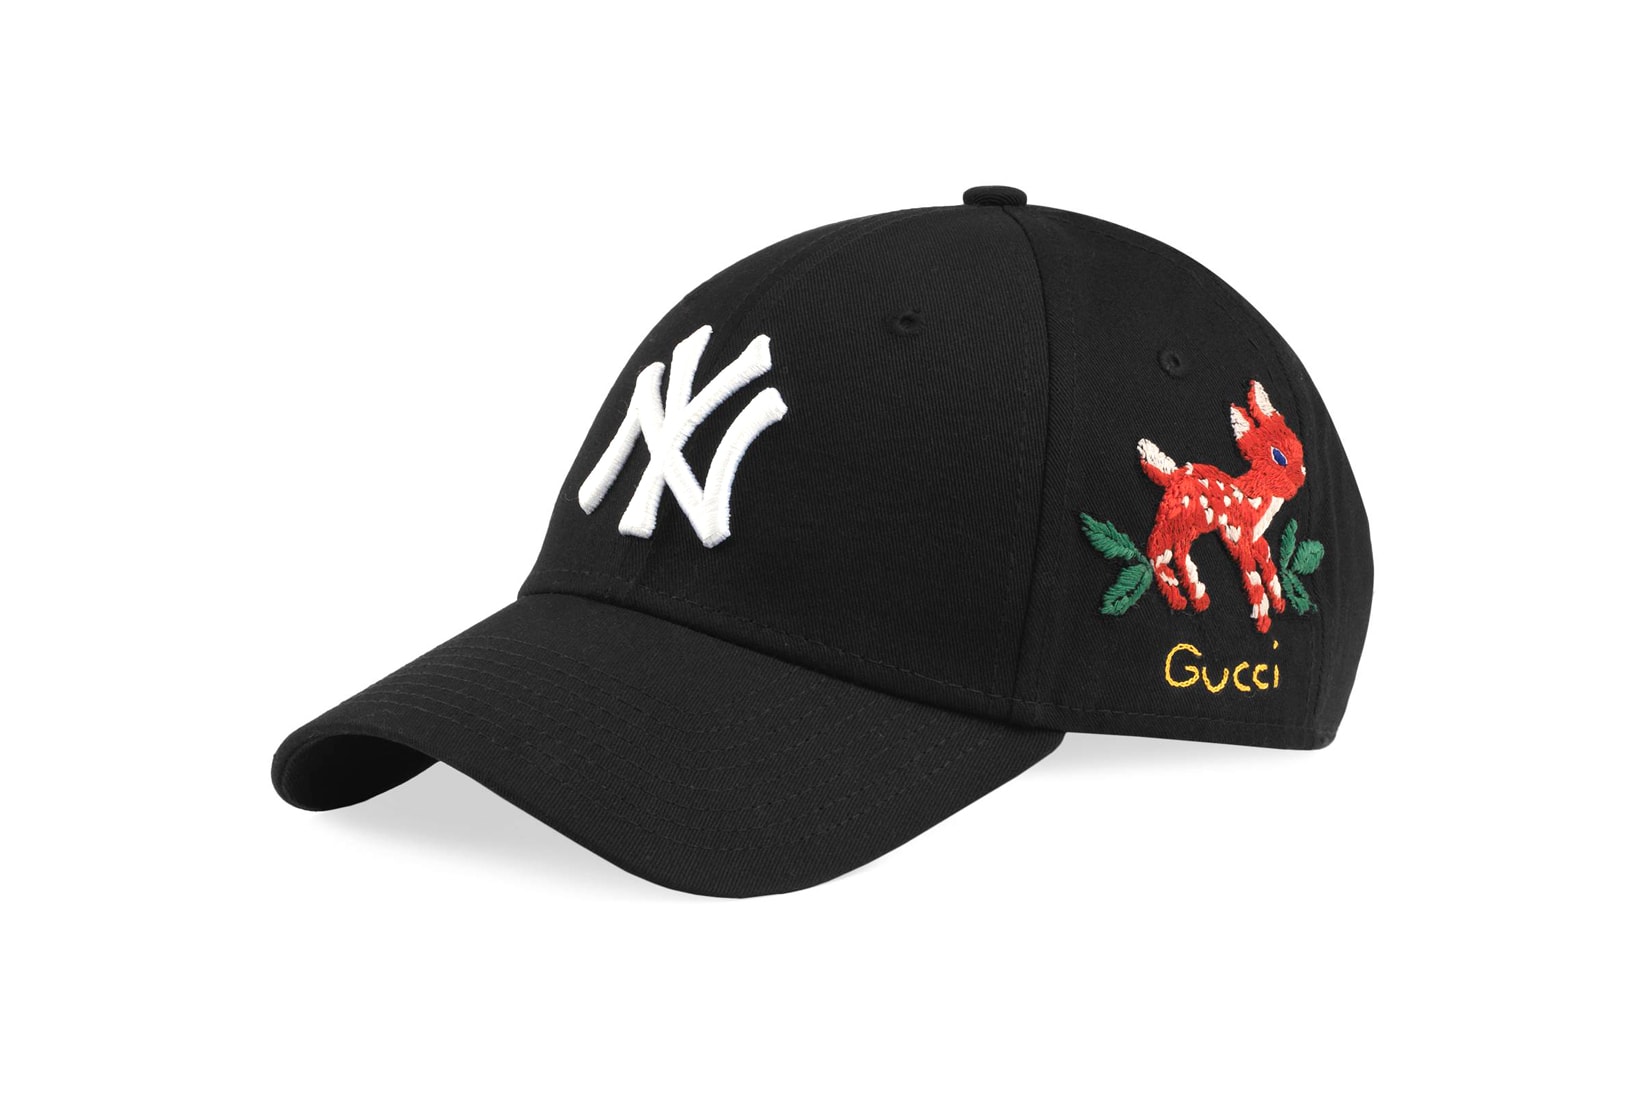 Original GUCCI Face Cap Available in Store in Ikoyi - Clothing